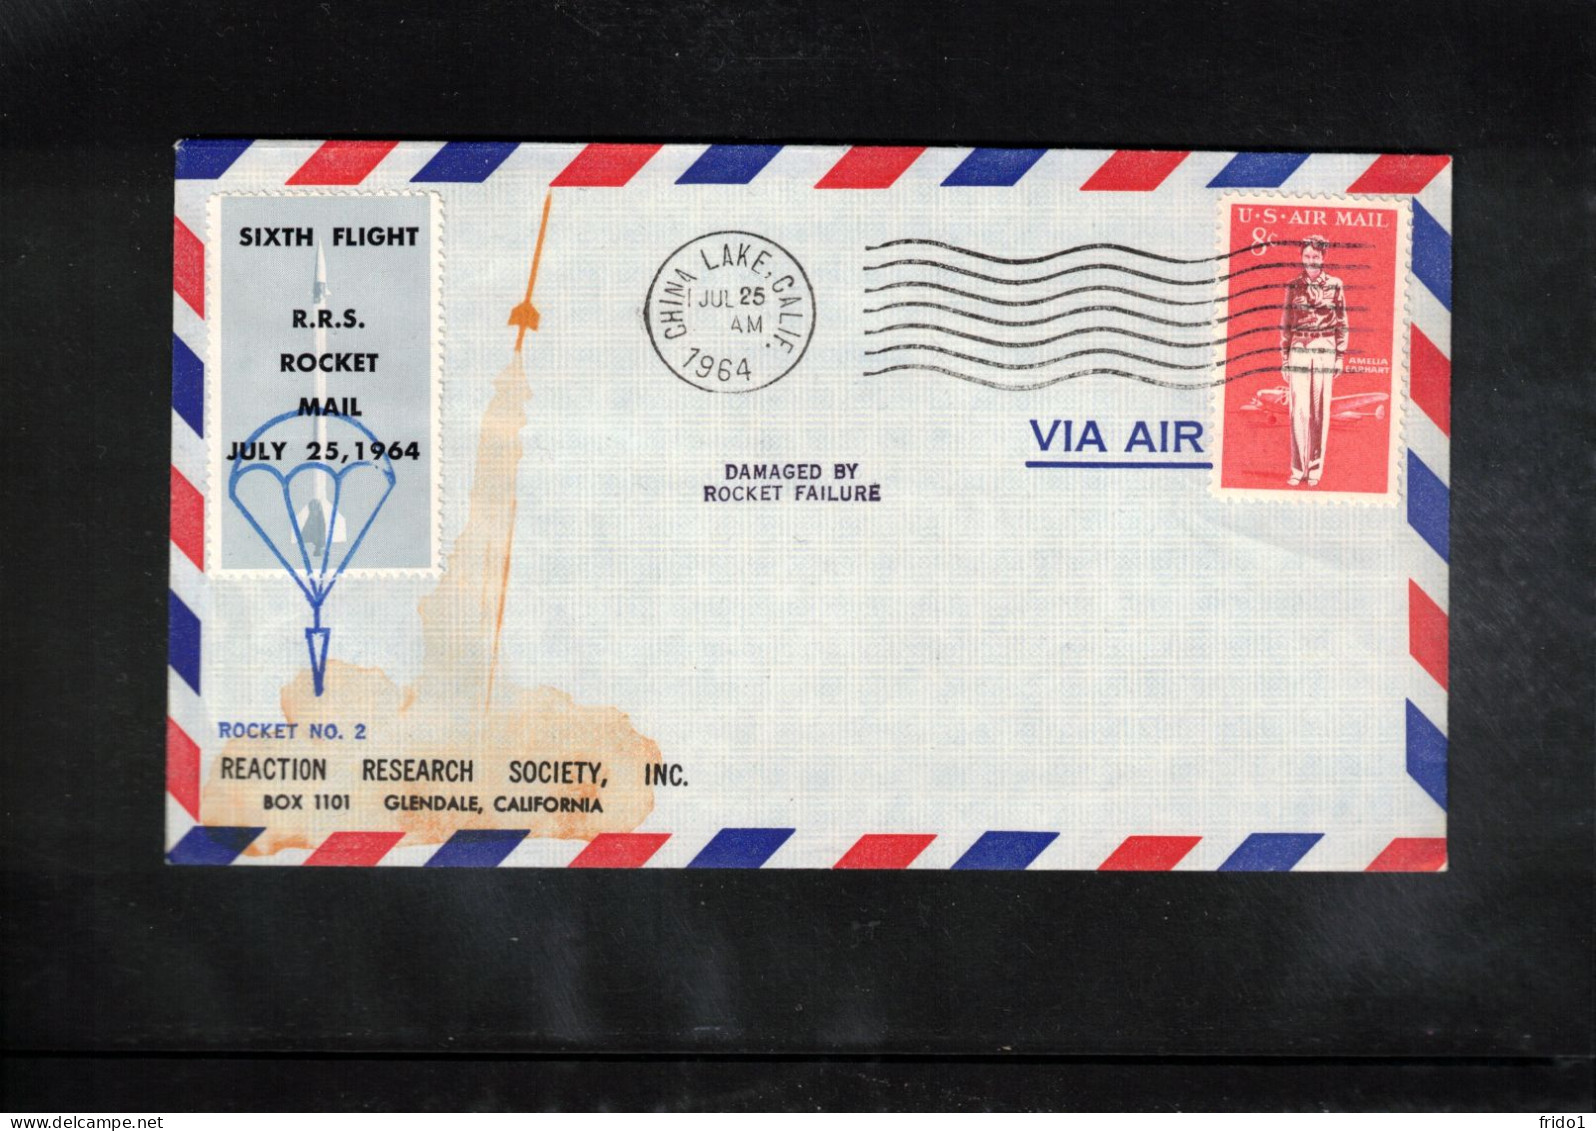 USA  1964 Rocket Mail - Sixth Flight Of R.R.S. Rocket Nr.2 Interesting Cover - Covers & Documents